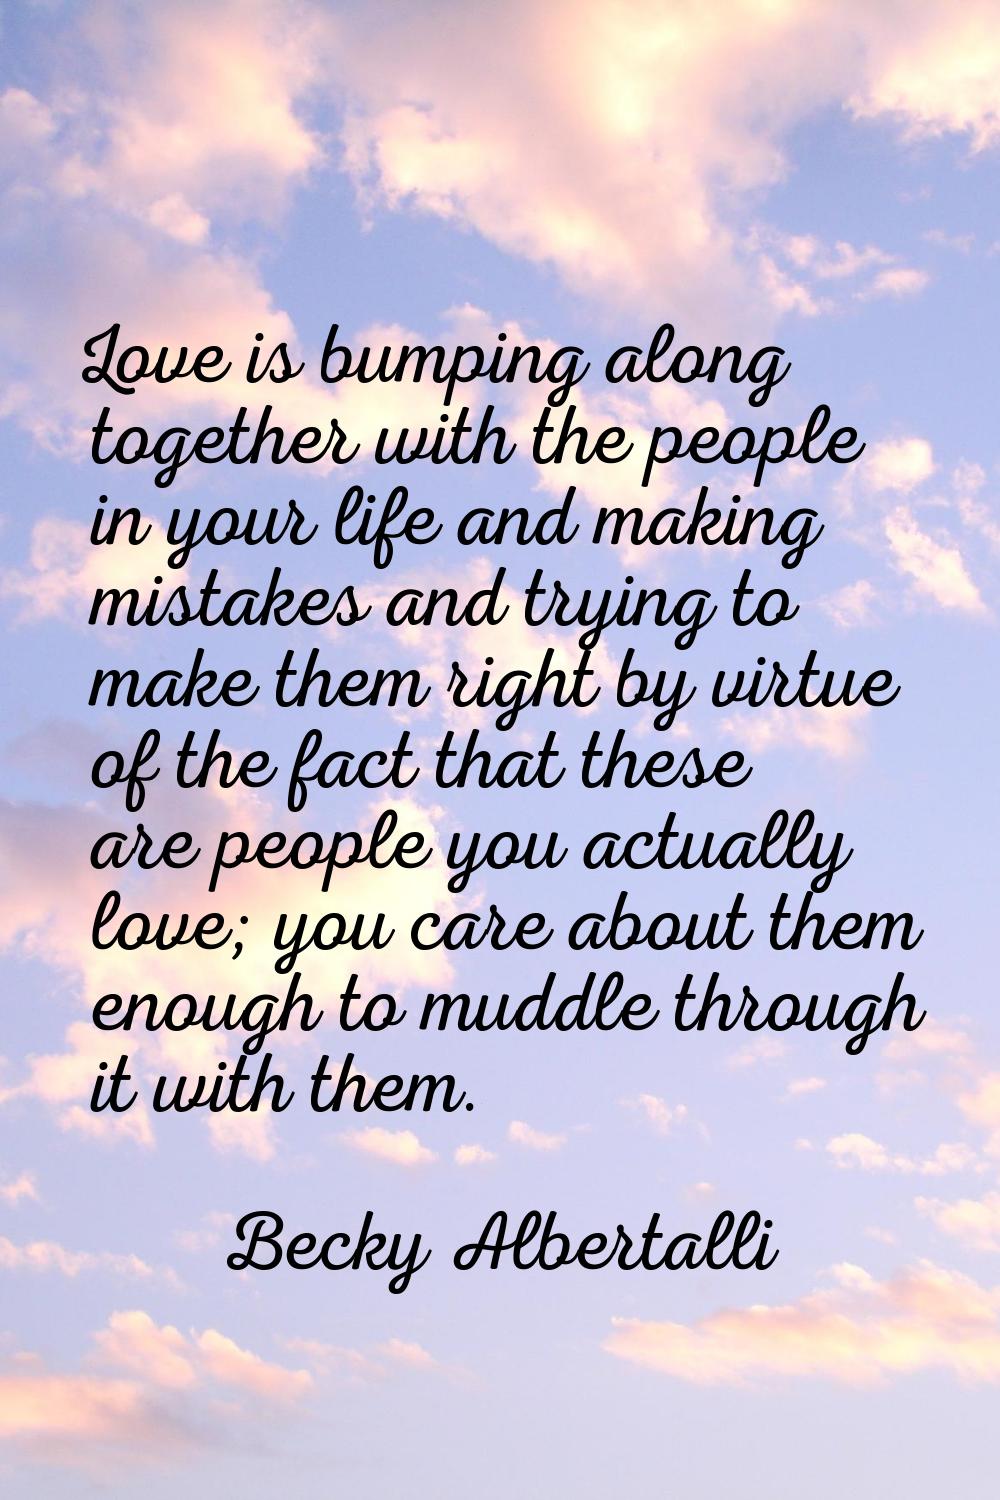 Love is bumping along together with the people in your life and making mistakes and trying to make 